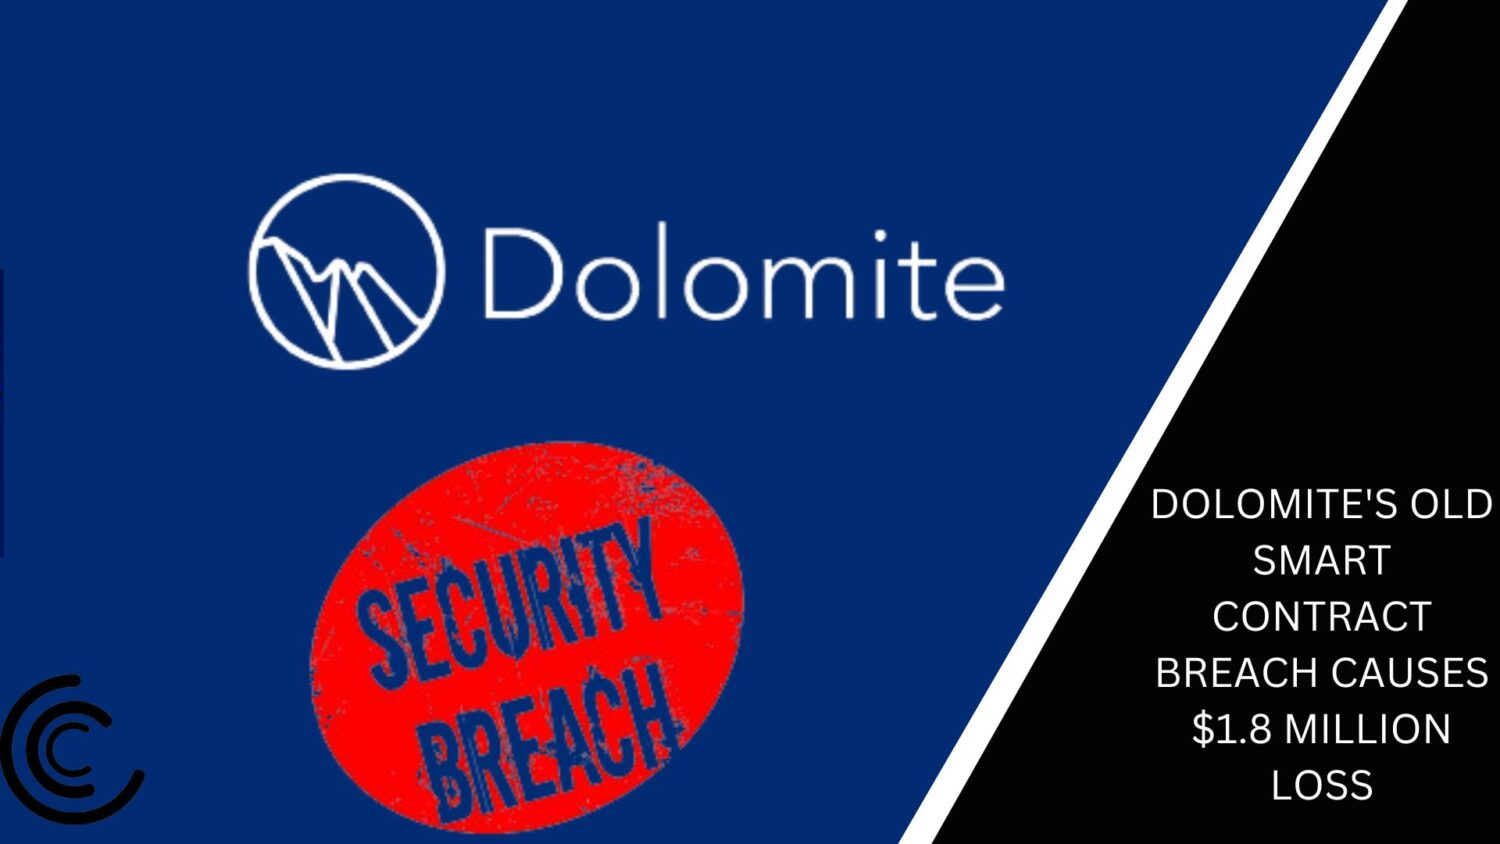 Dolomite'S Old Smart Contract Breach Causes $1.8 Million Loss